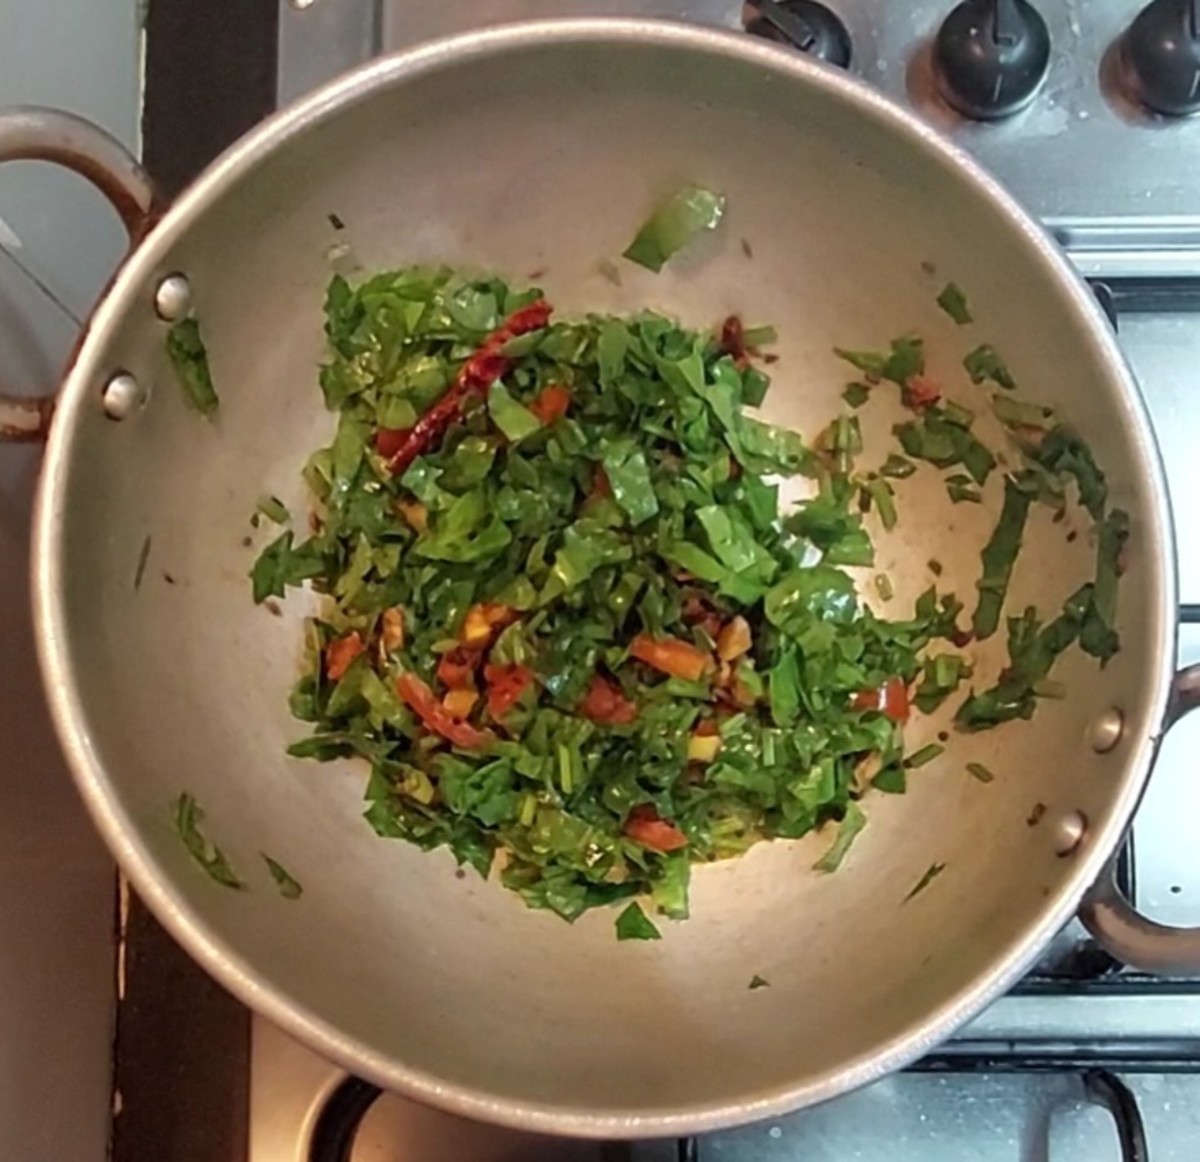 Add 1 cup washed and chopped palak leaves with tender stems, saute till palak shrinks.